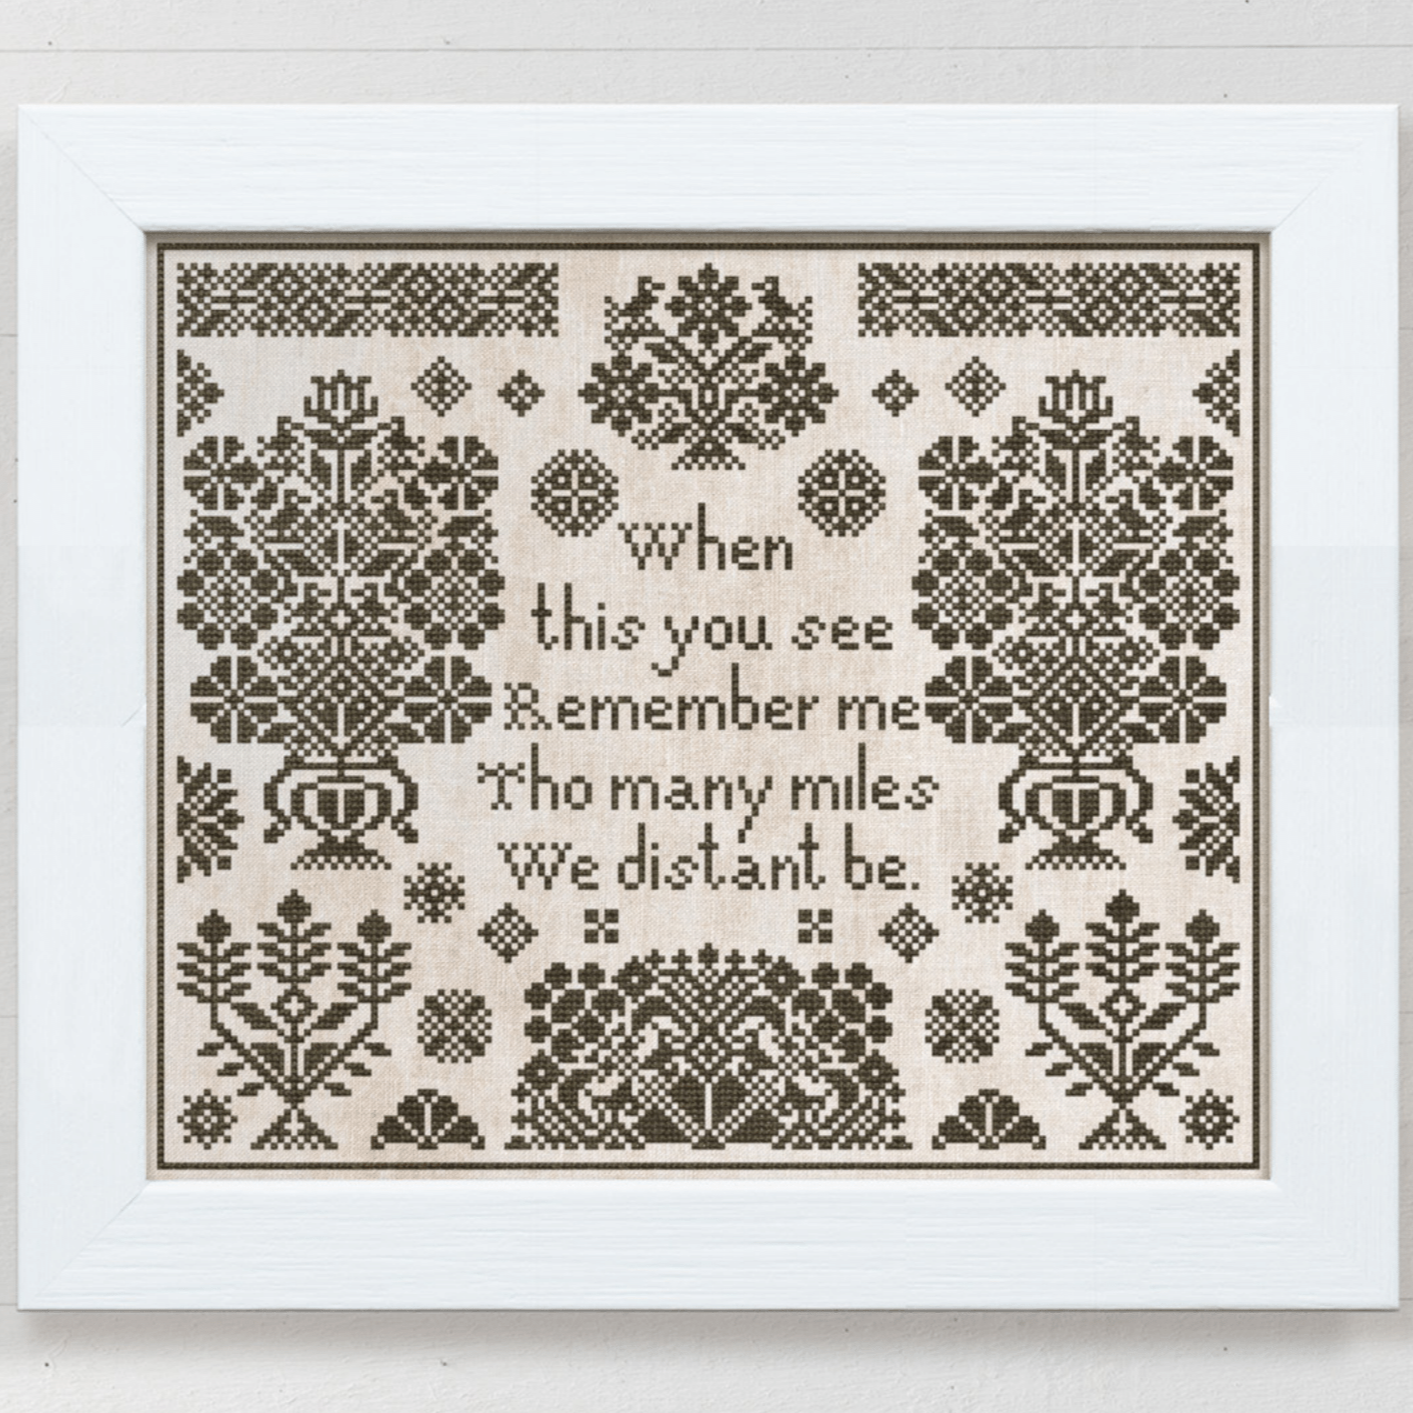 Modern Folk Embroidery - When This You See Remember Me - Booklet Chart